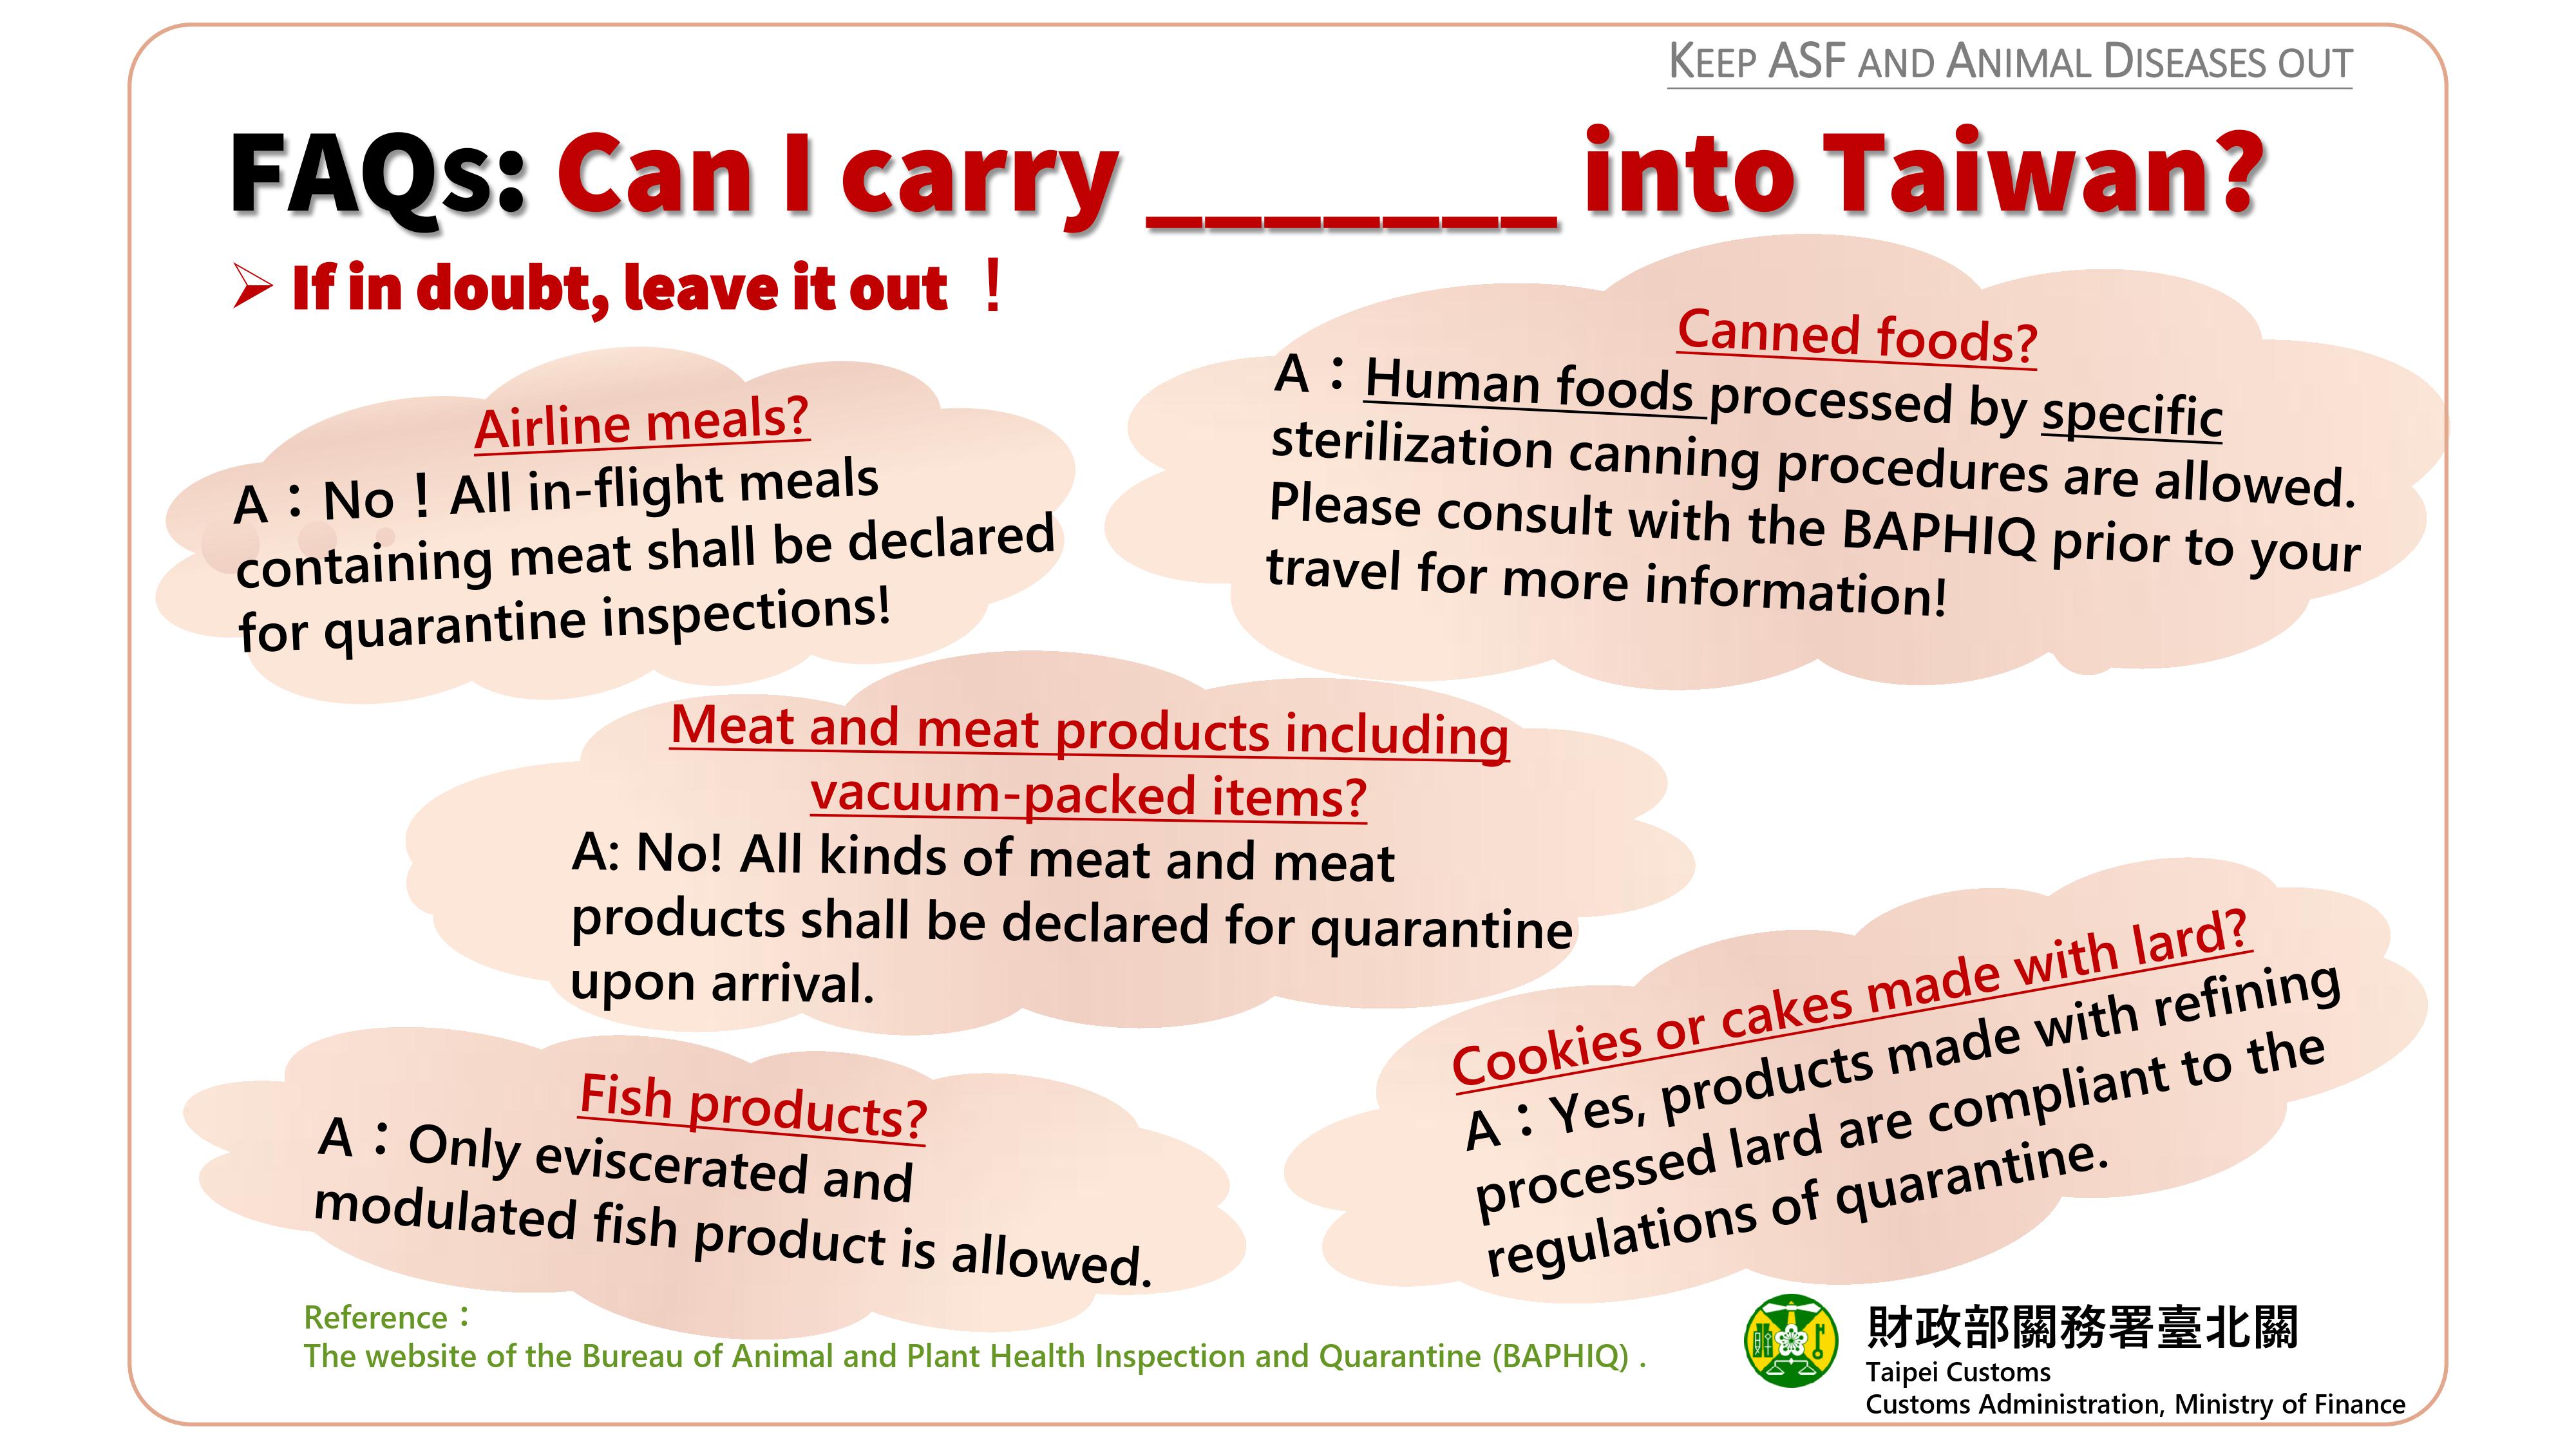 airline meals, canned foods, meat, meat products, fish products, cookies and cakes made with lard, lard